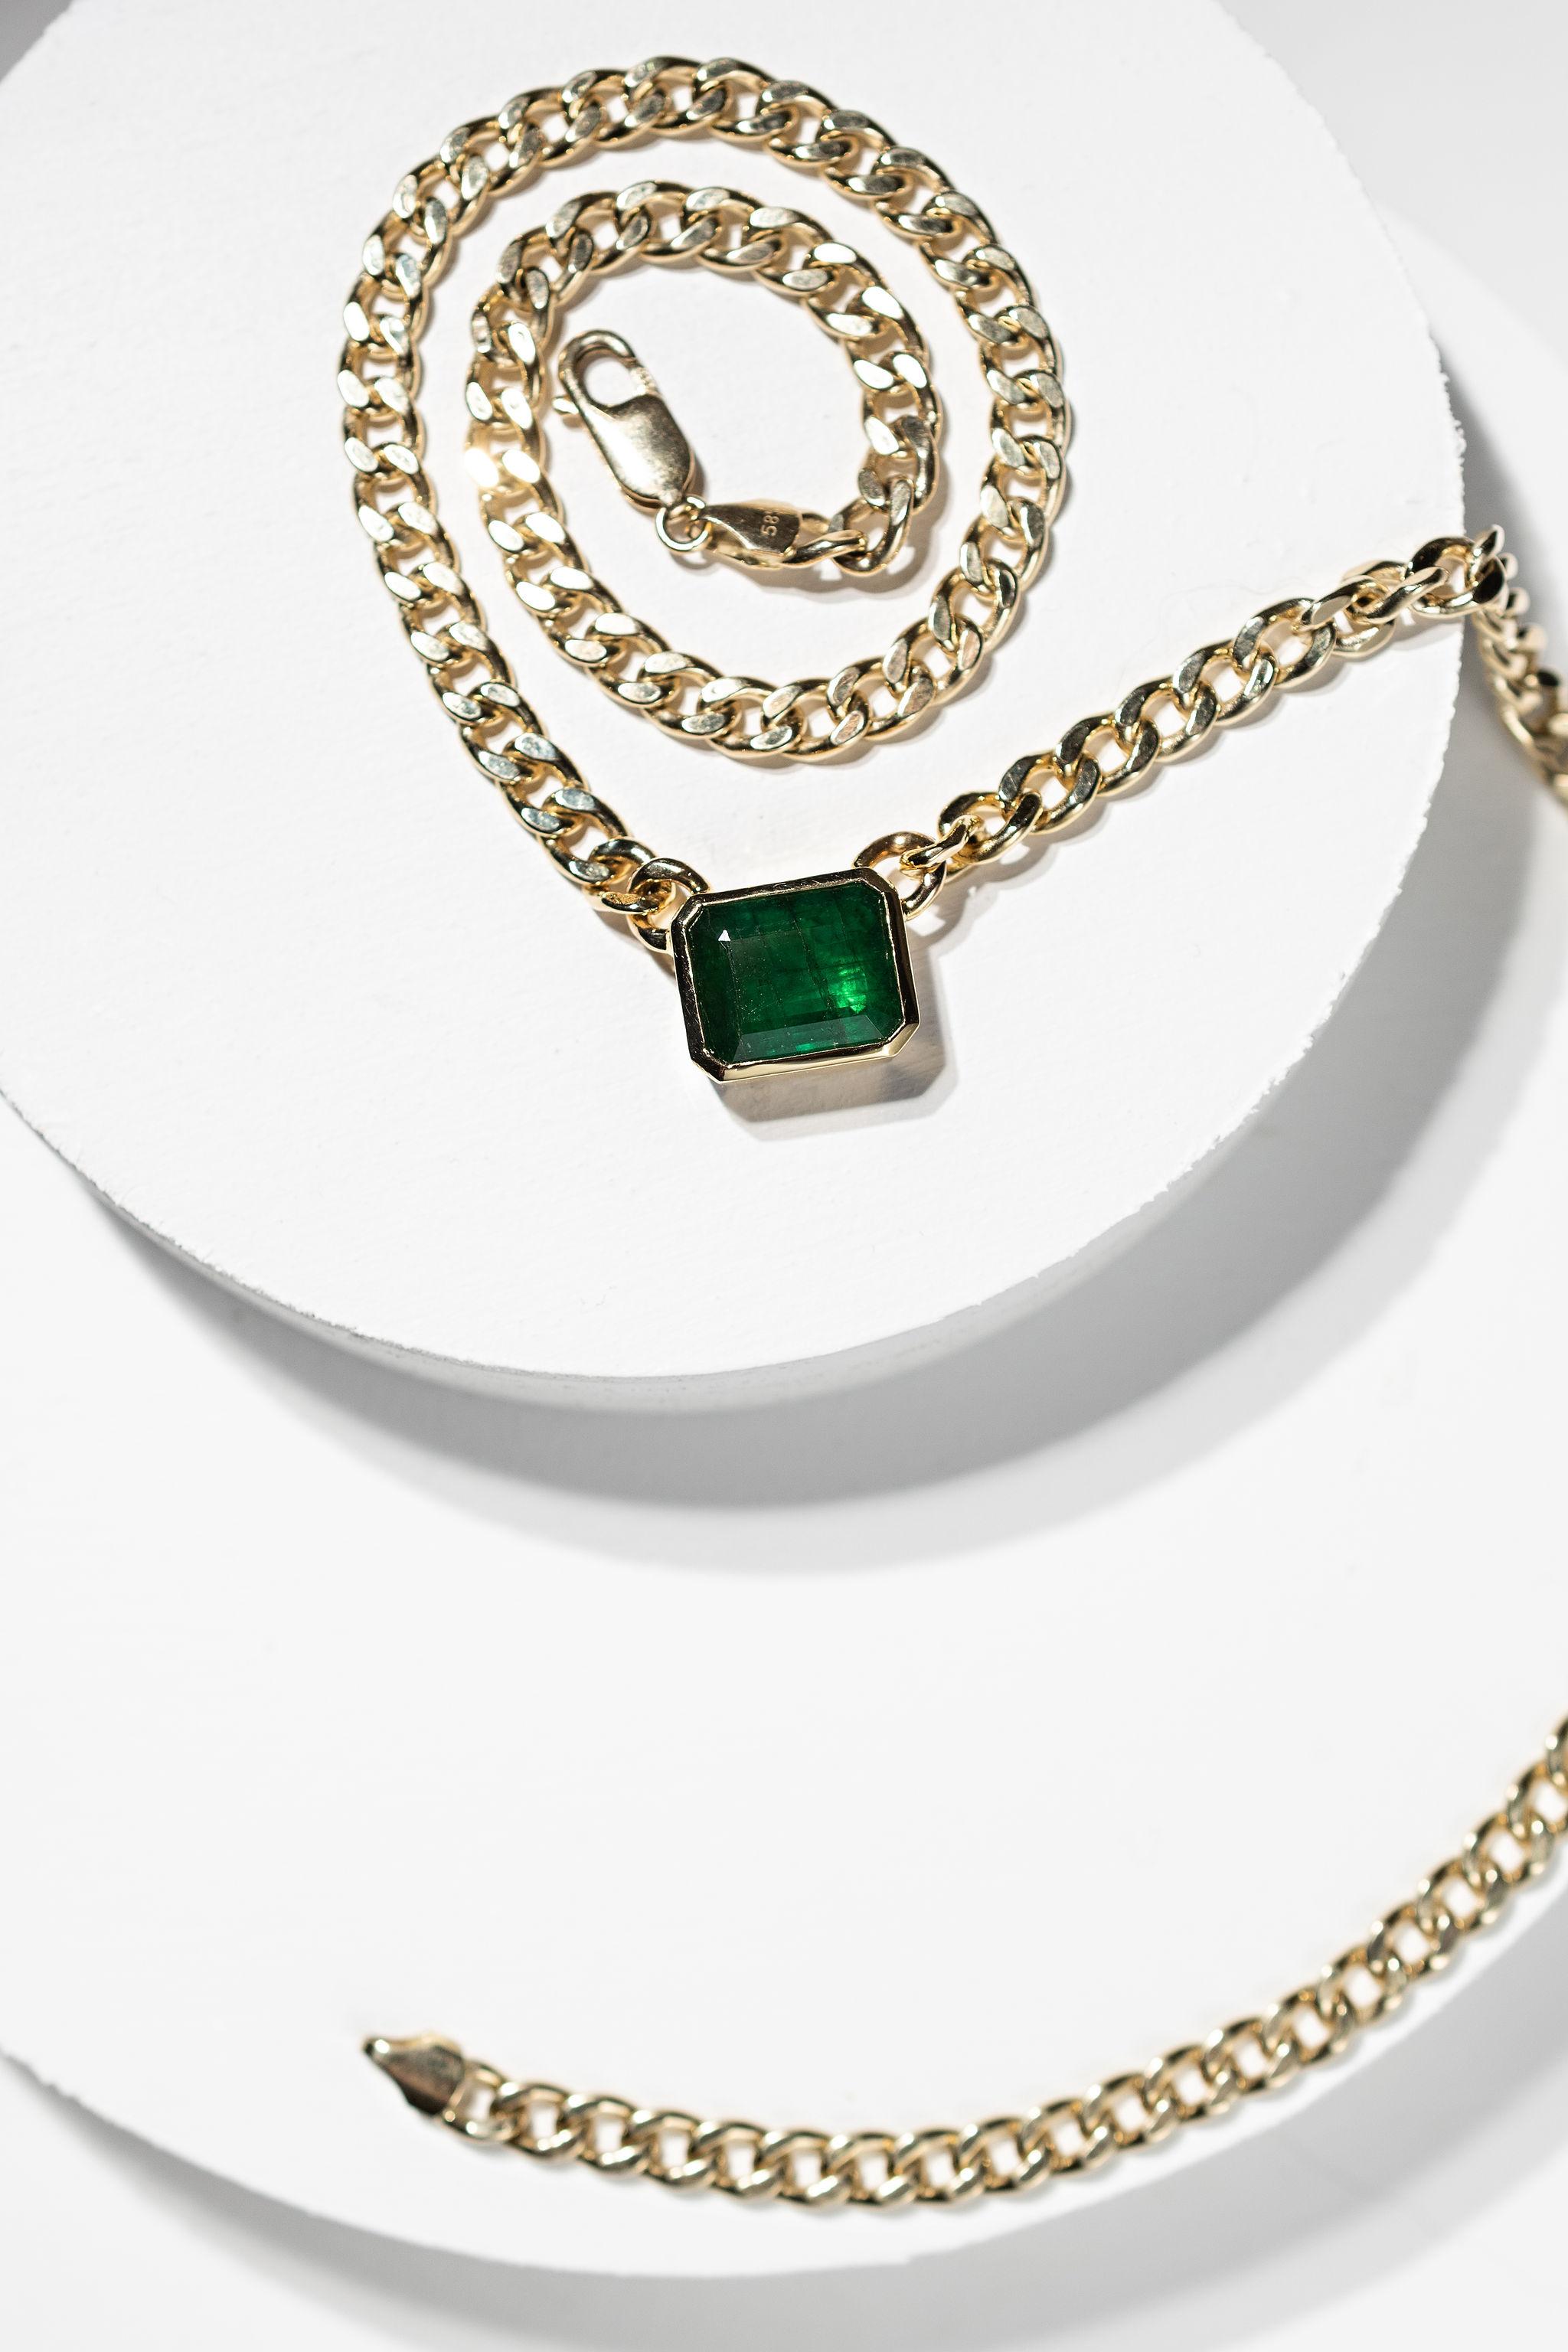 5.5ct Emerald Necklace, 14k Yellow Gold 6